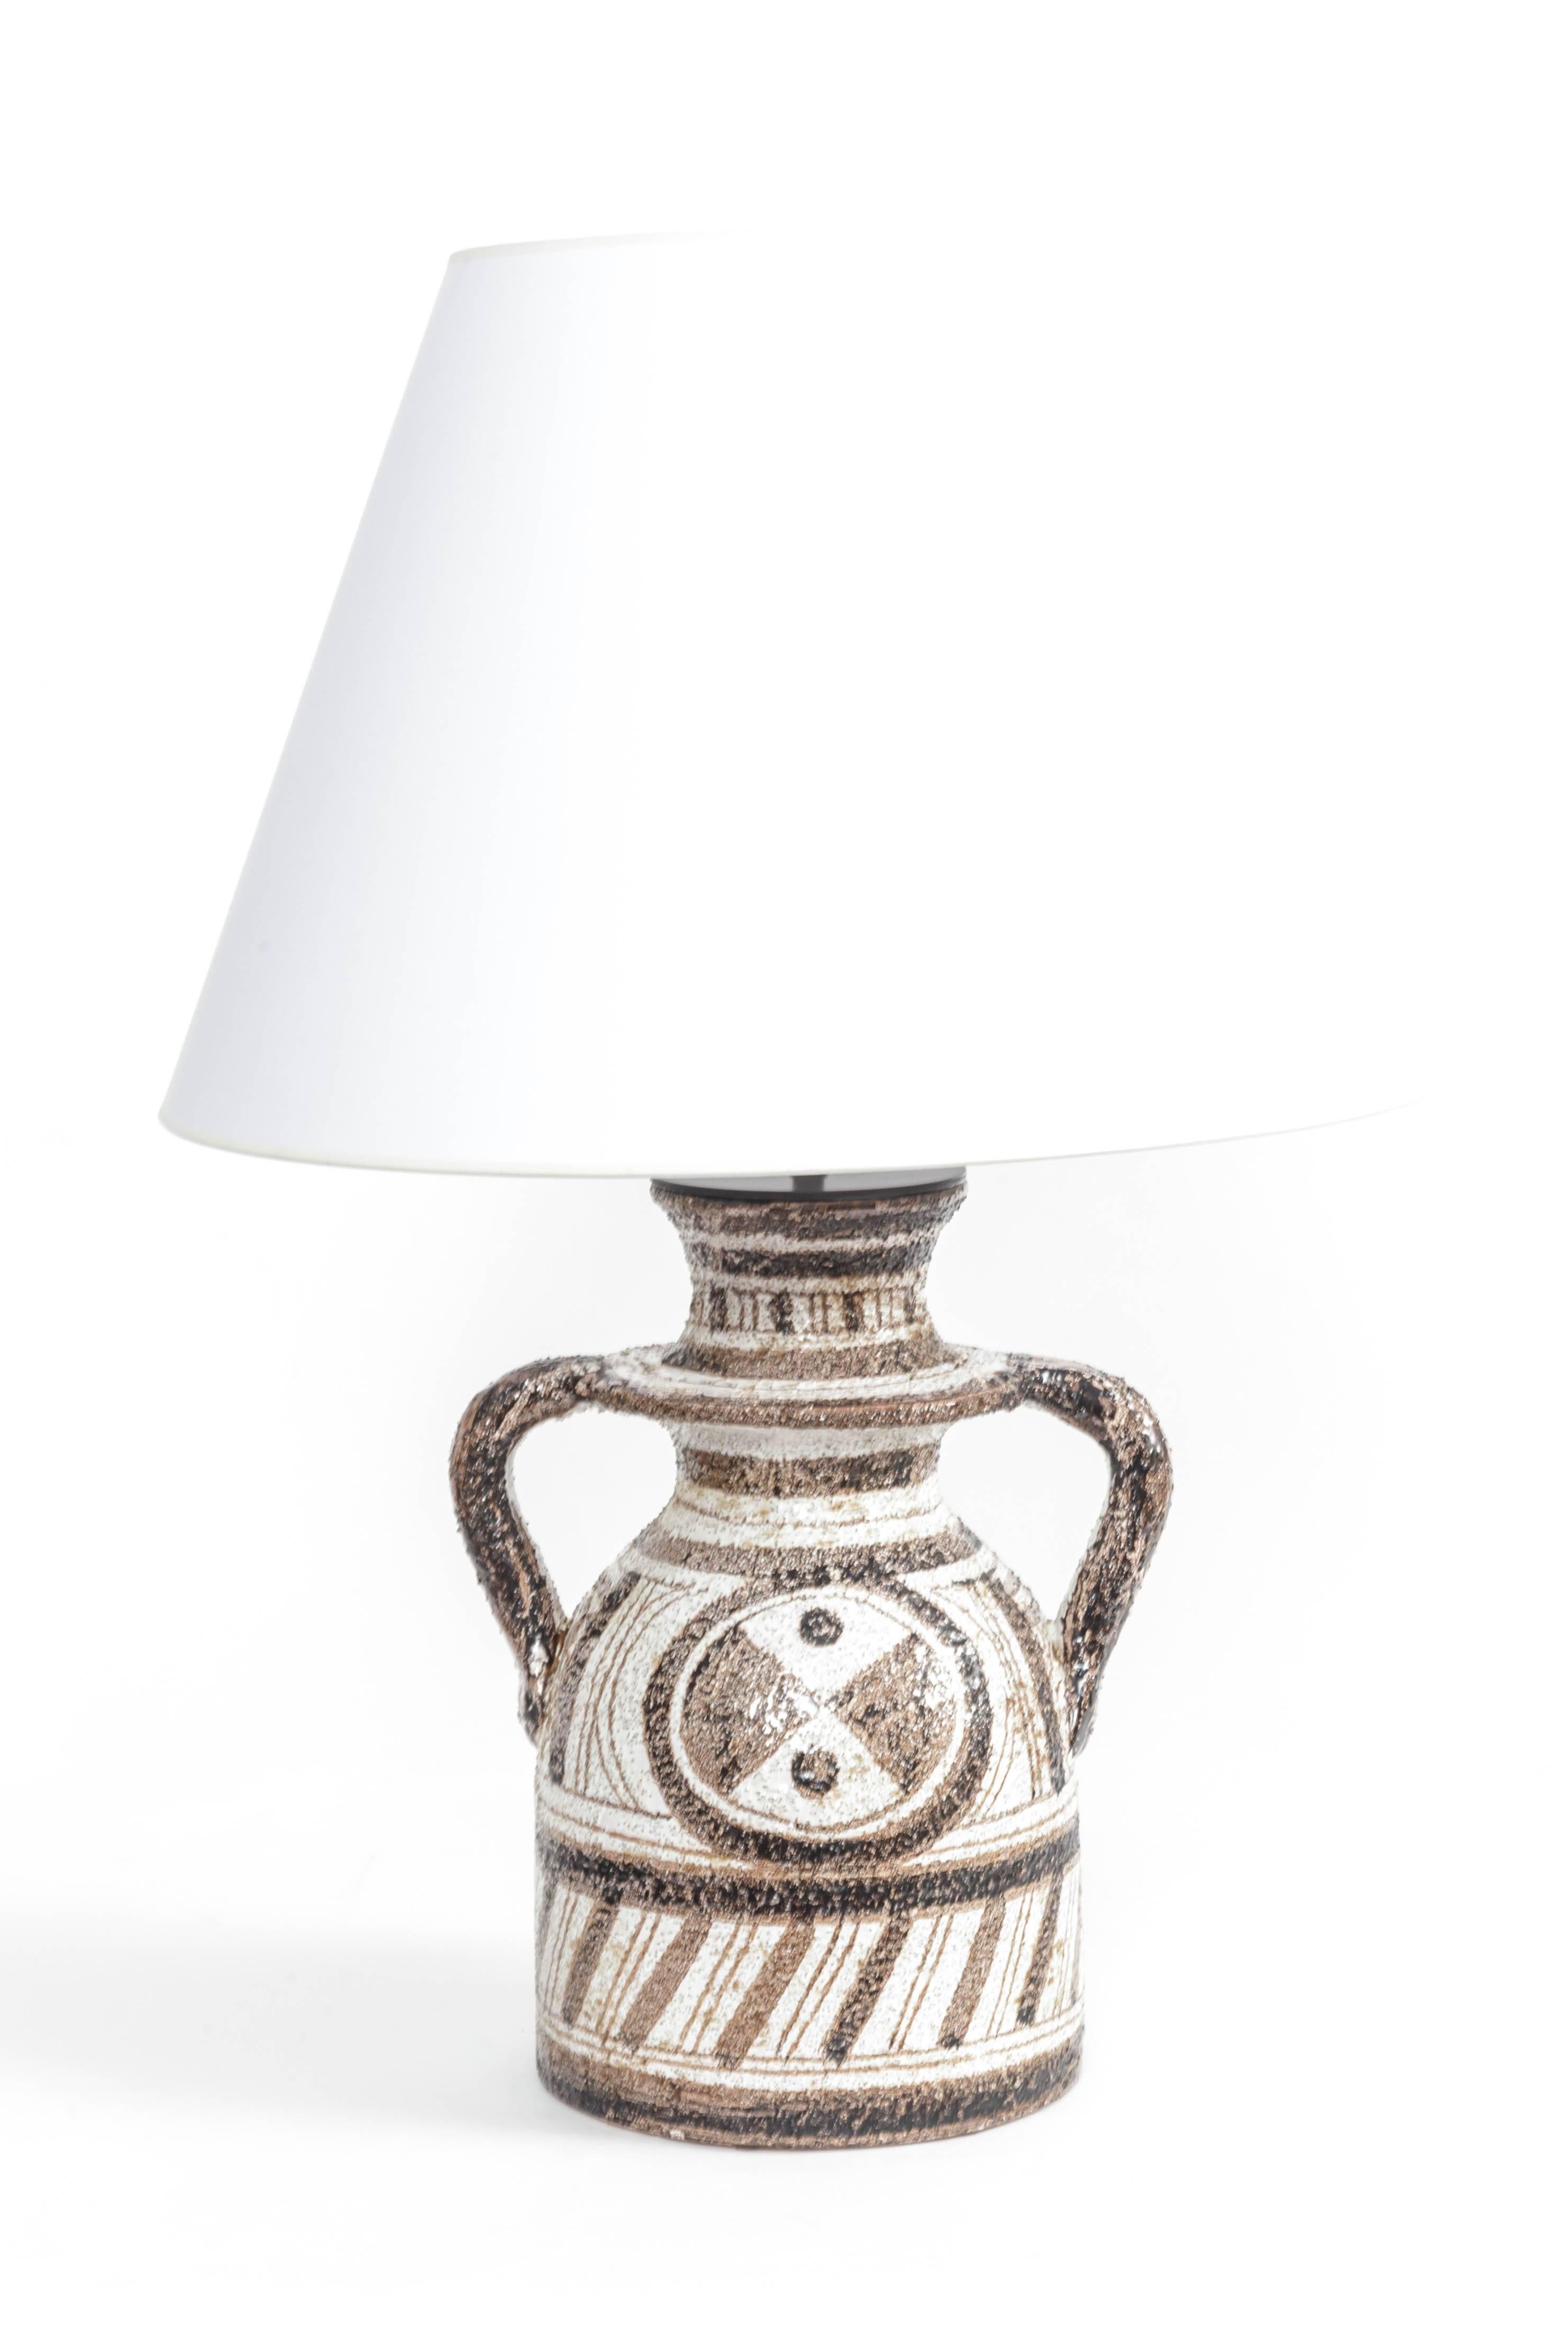 Mid-20th Century Rosenthal Netter Graphic Textured Table Lamp